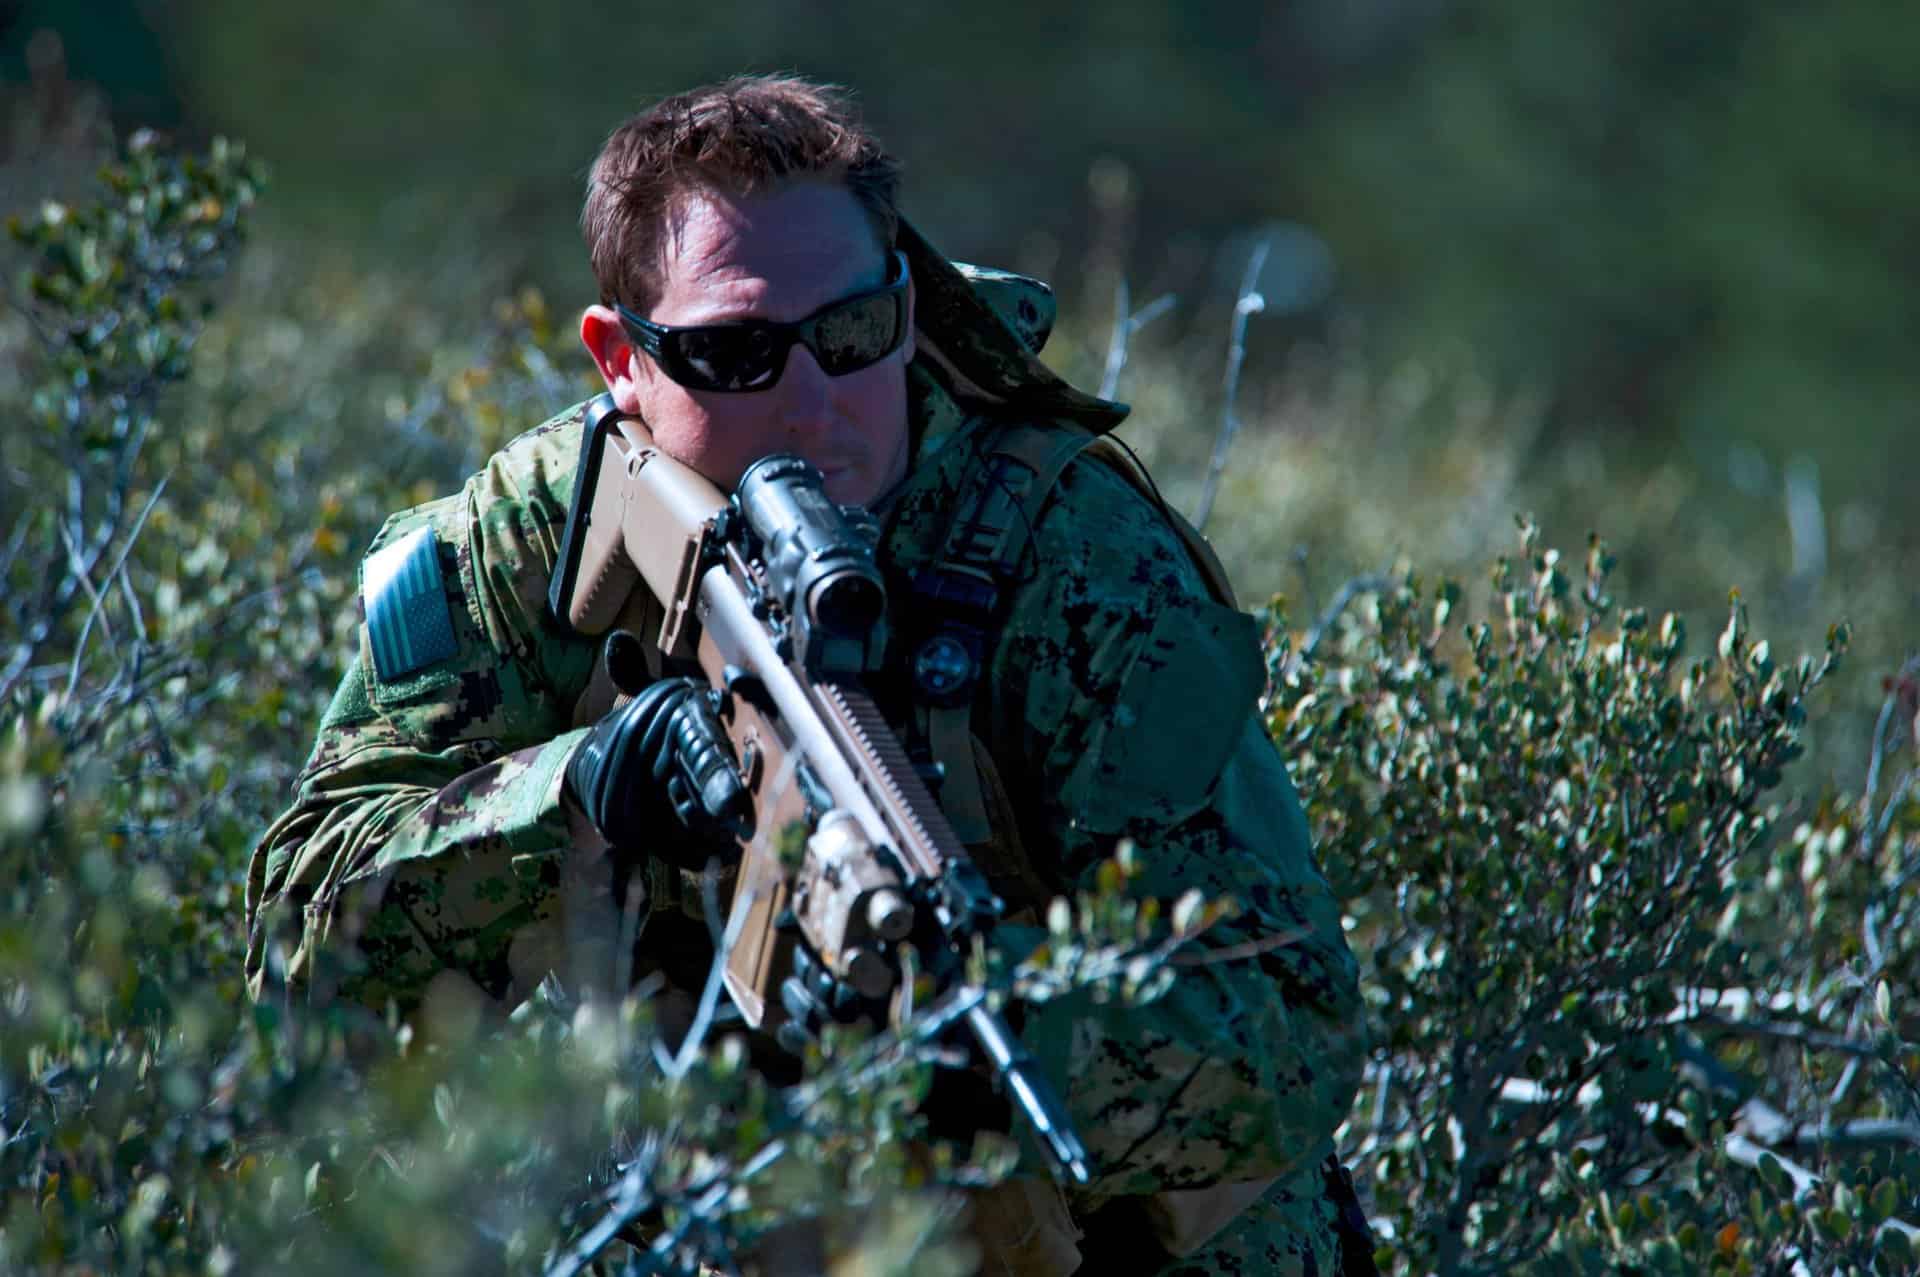 What I Learned About Ambition and Faith From A Navy SEAL Sniper